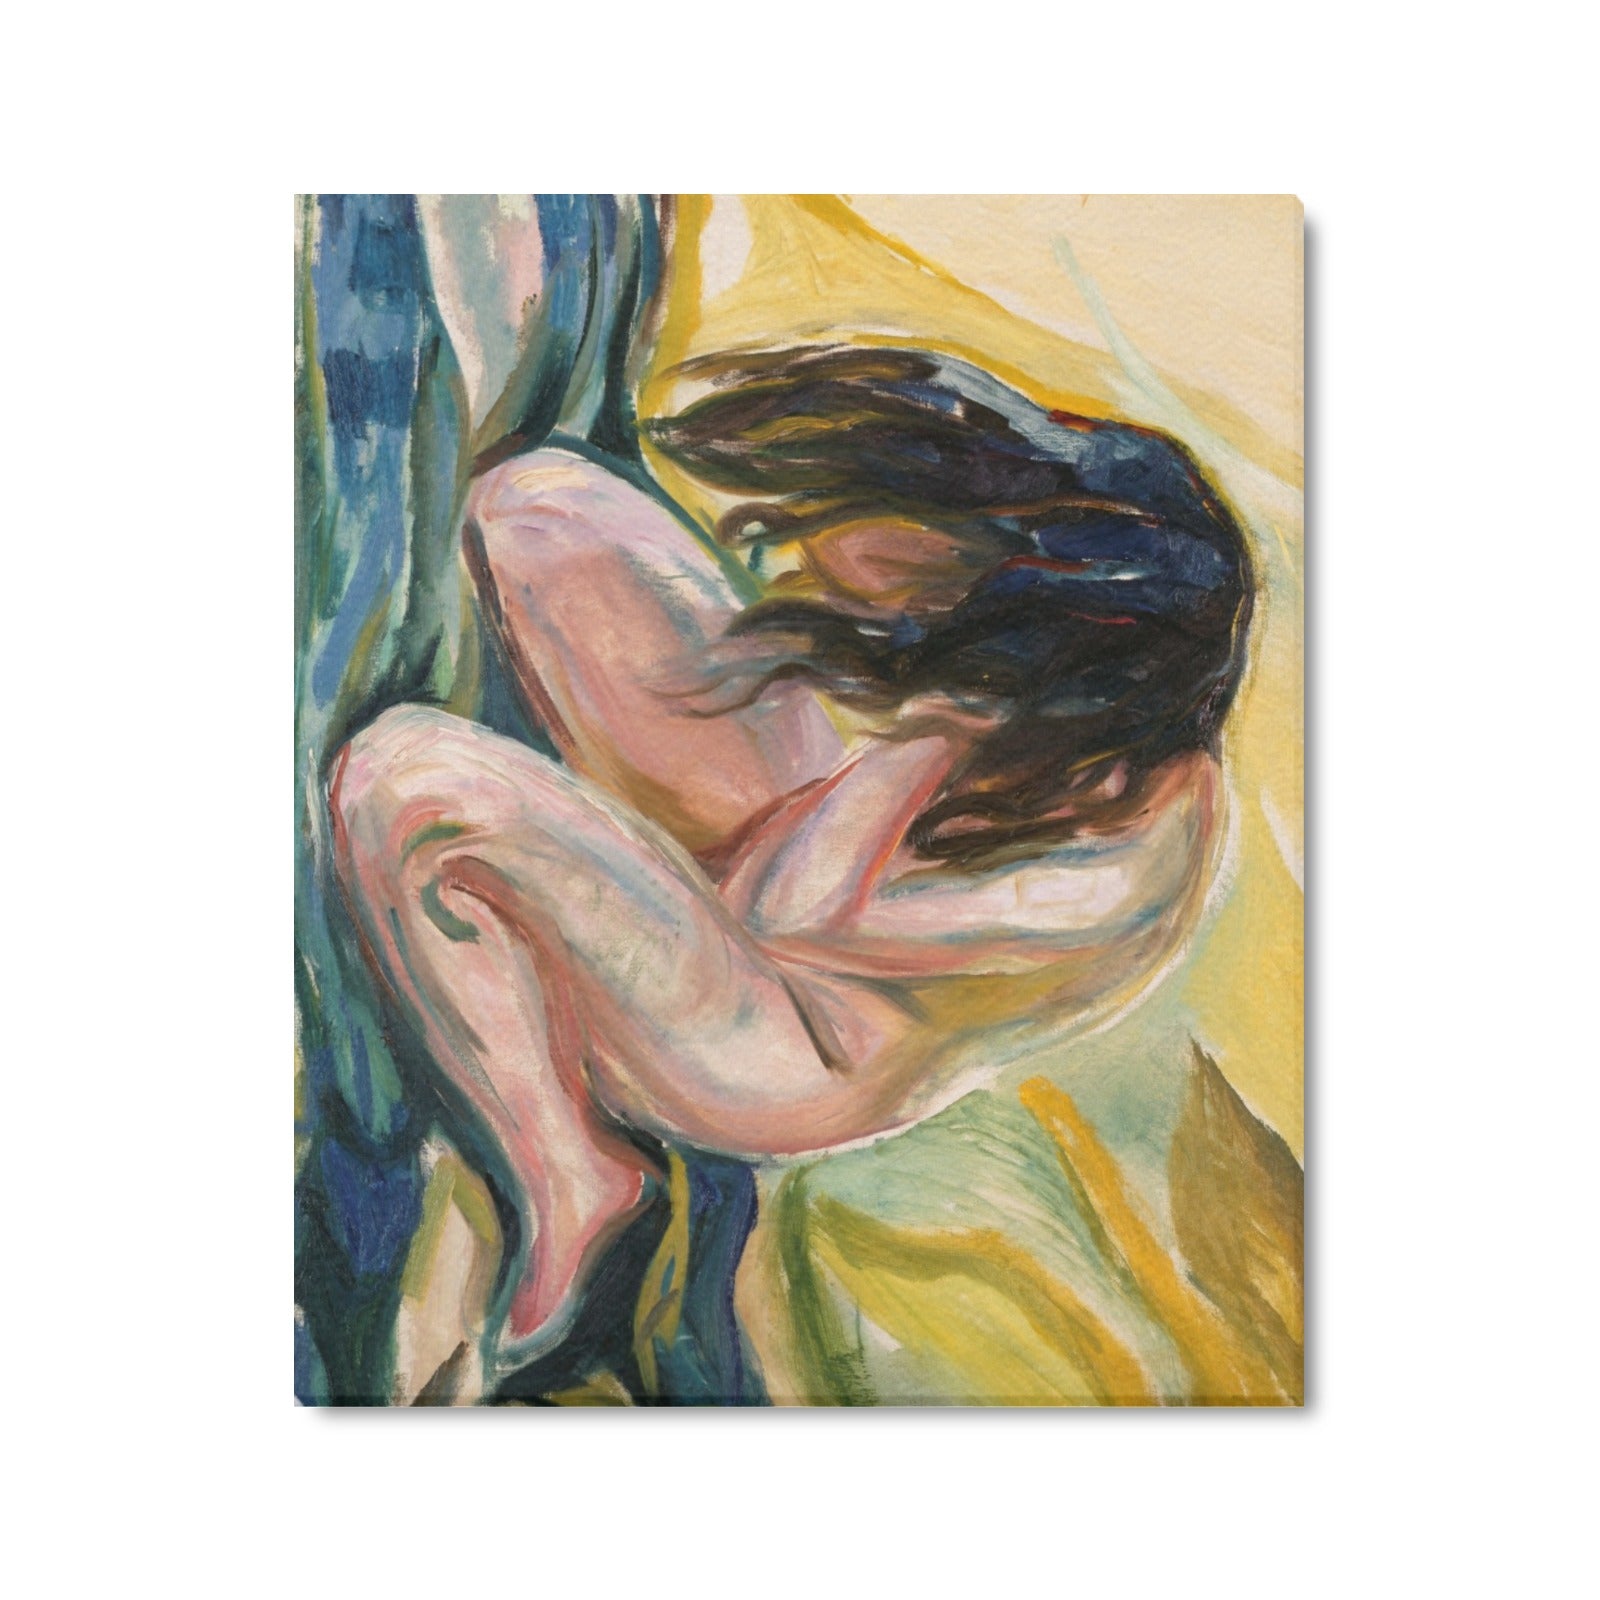 EDVARD MUNCH - WEEPING NUDE (1919) - CANVAS PRINT 24"x 20"